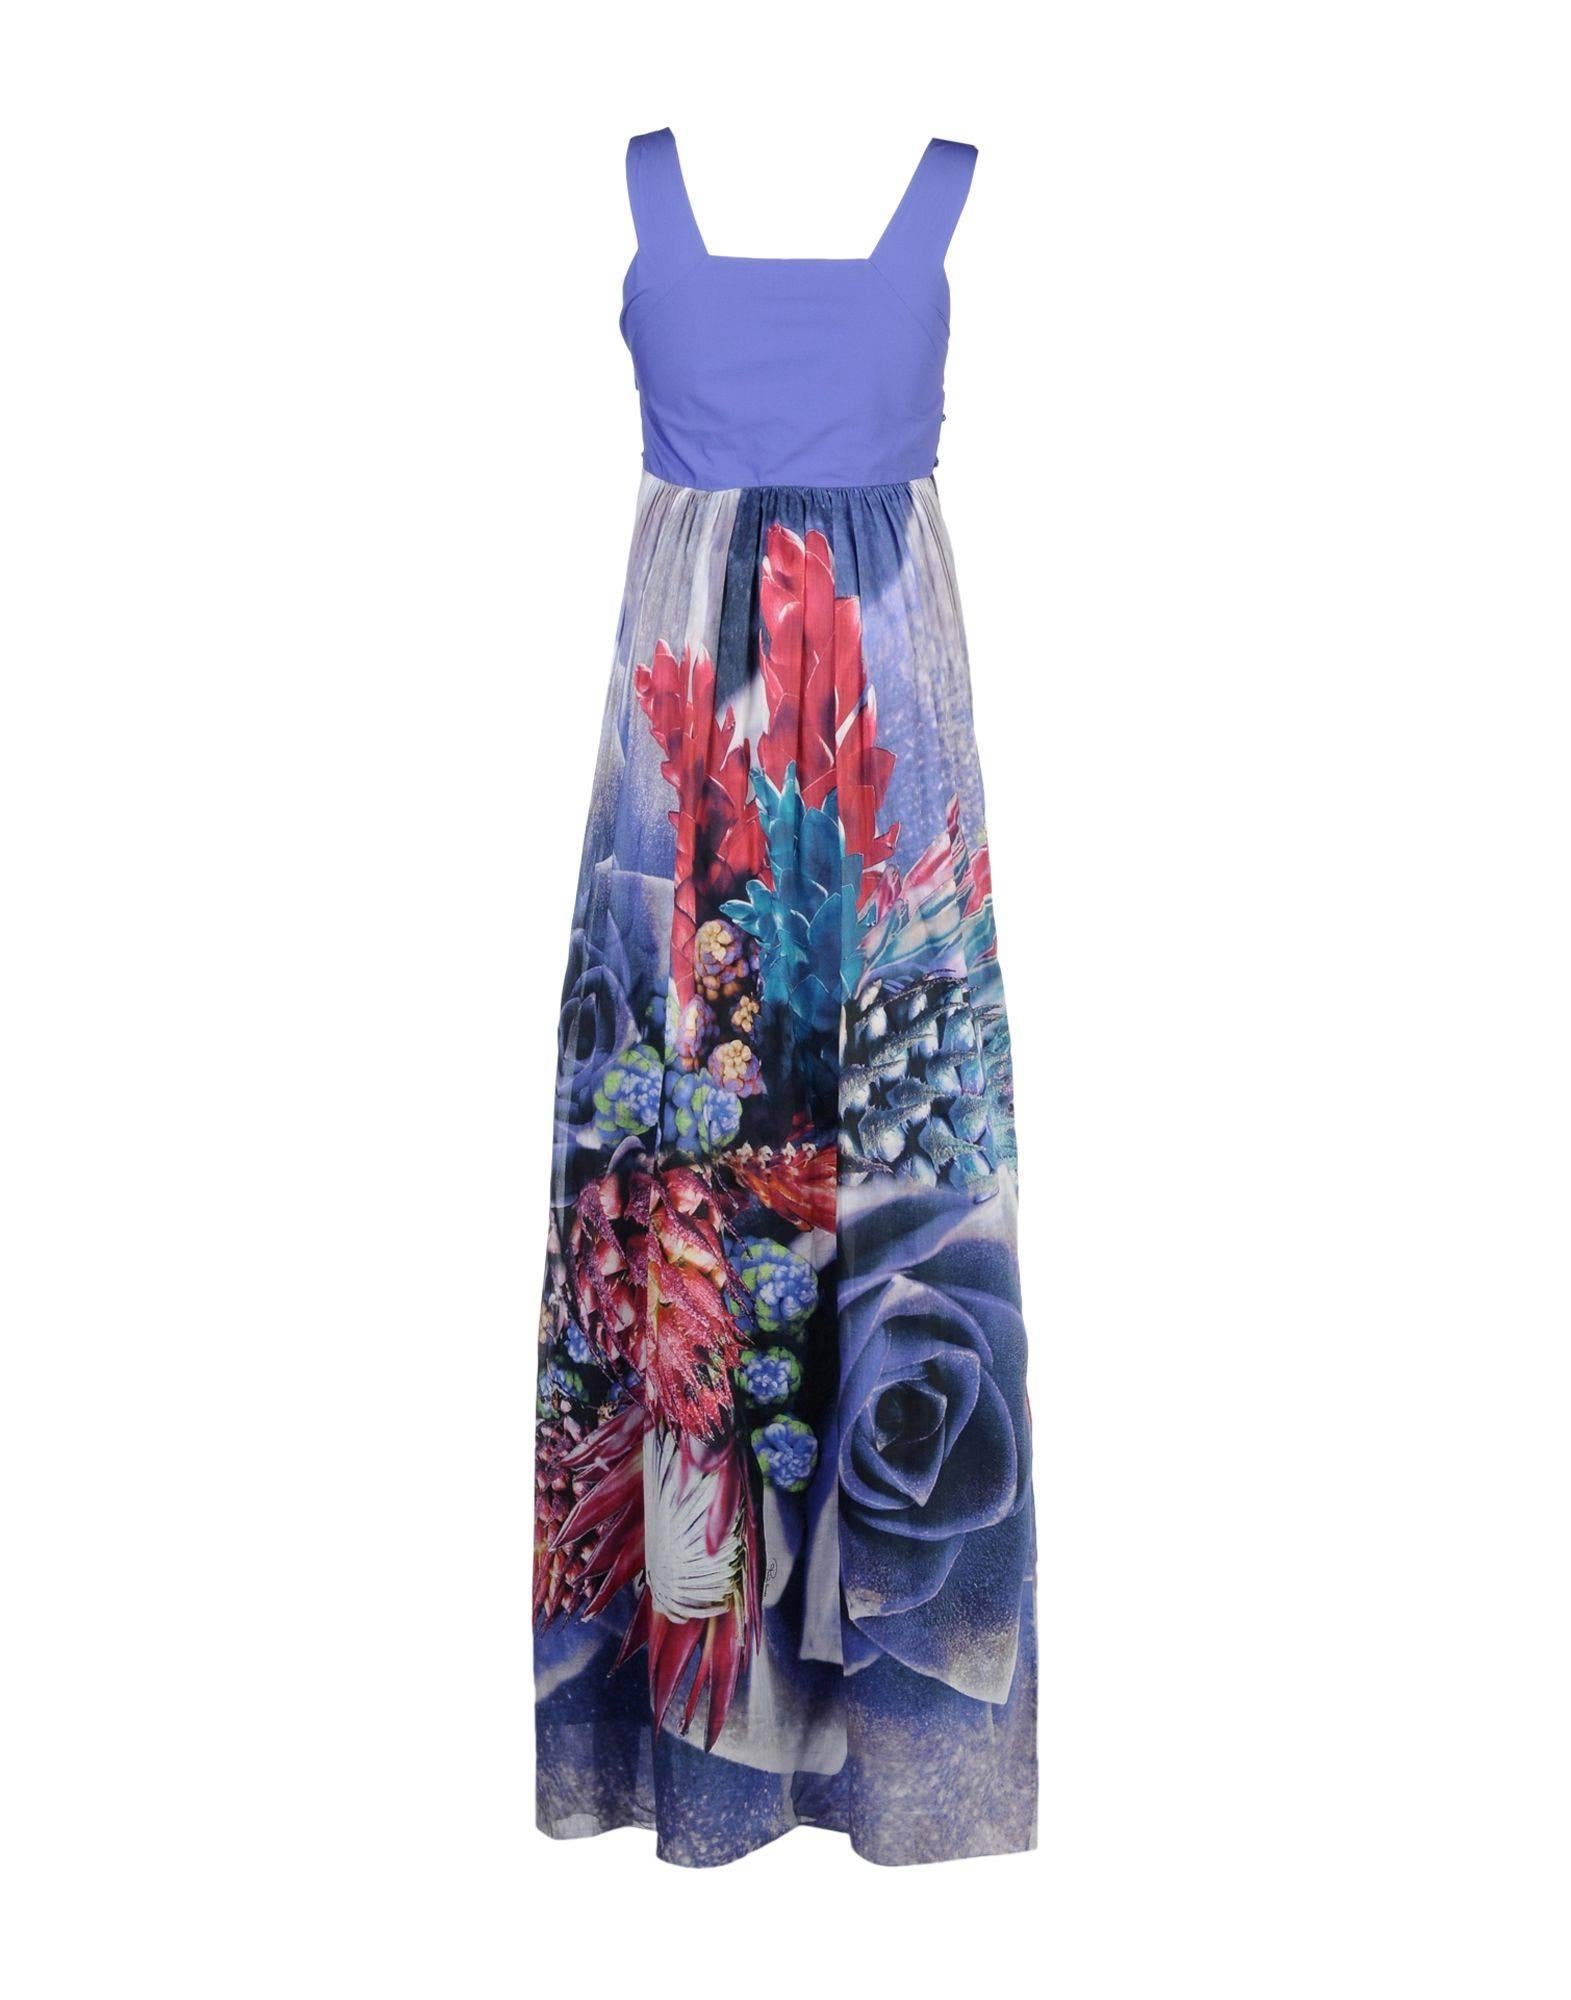 ROBERTO CAVALLI 

Embellished long dress

The amazing dress is crafted from 100% cotton and beautifully embellished.

Gorgeous floral print

Fully lined

IT Size 42 -  US 6

Total length is about 64 inches 

Brand new, with tags.
